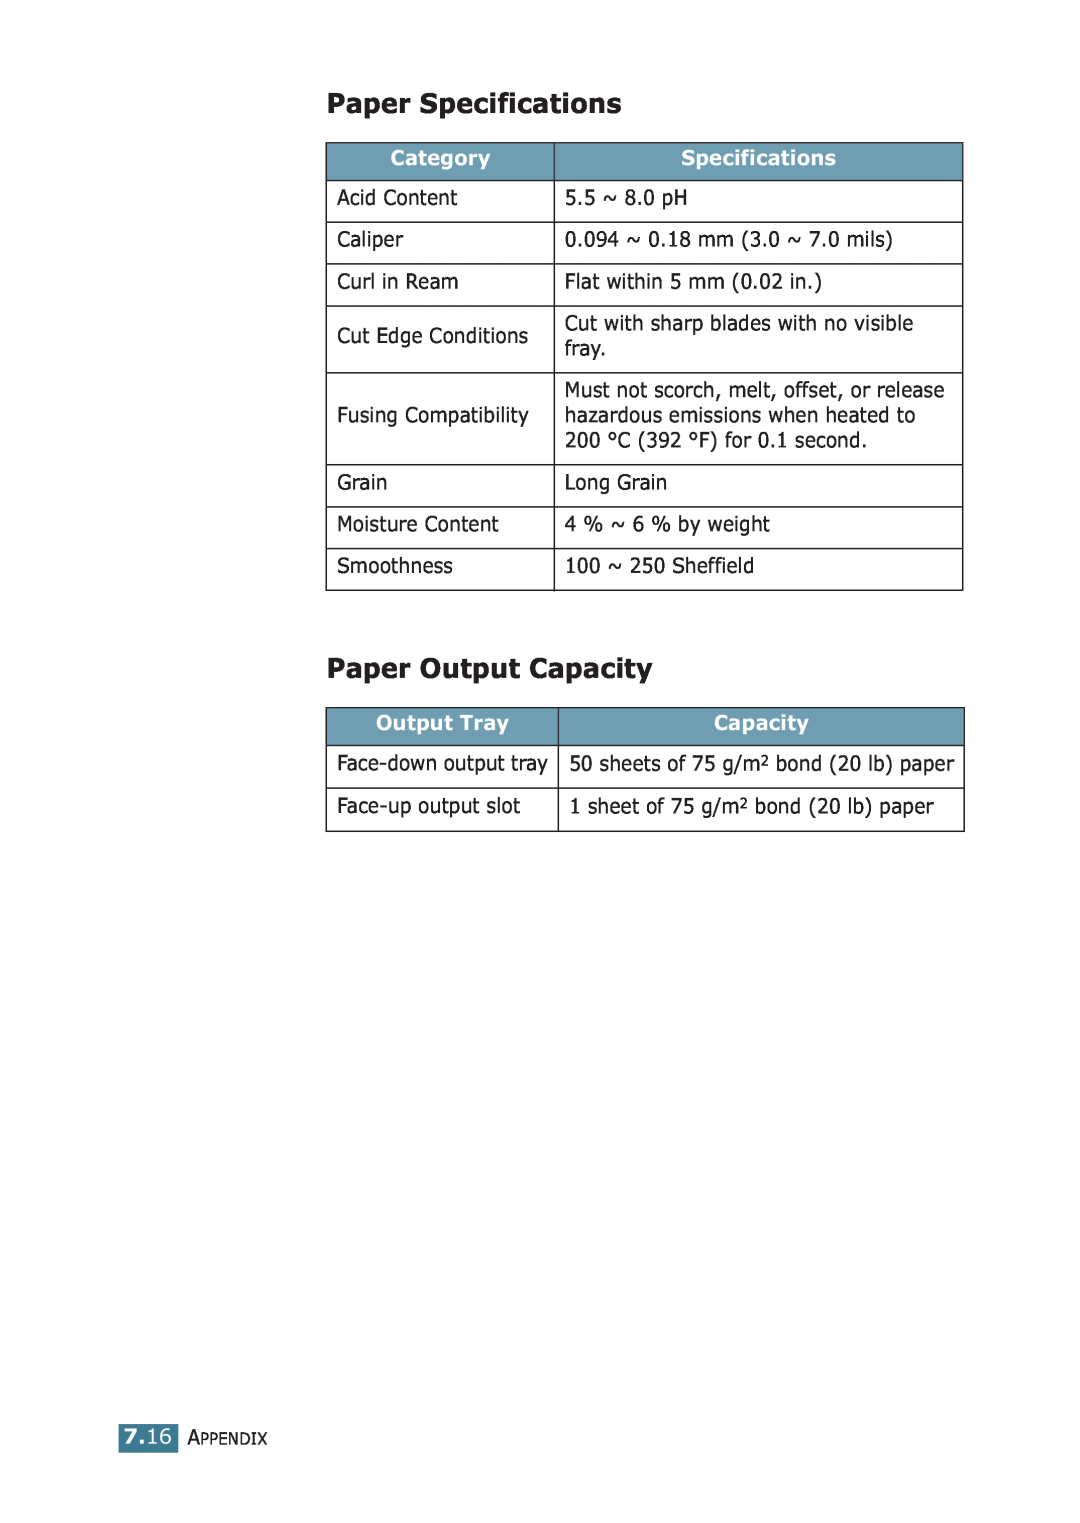 Samsung ML-1710P manual Paper Specifications, Paper Output Capacity, Category, Output Tray 